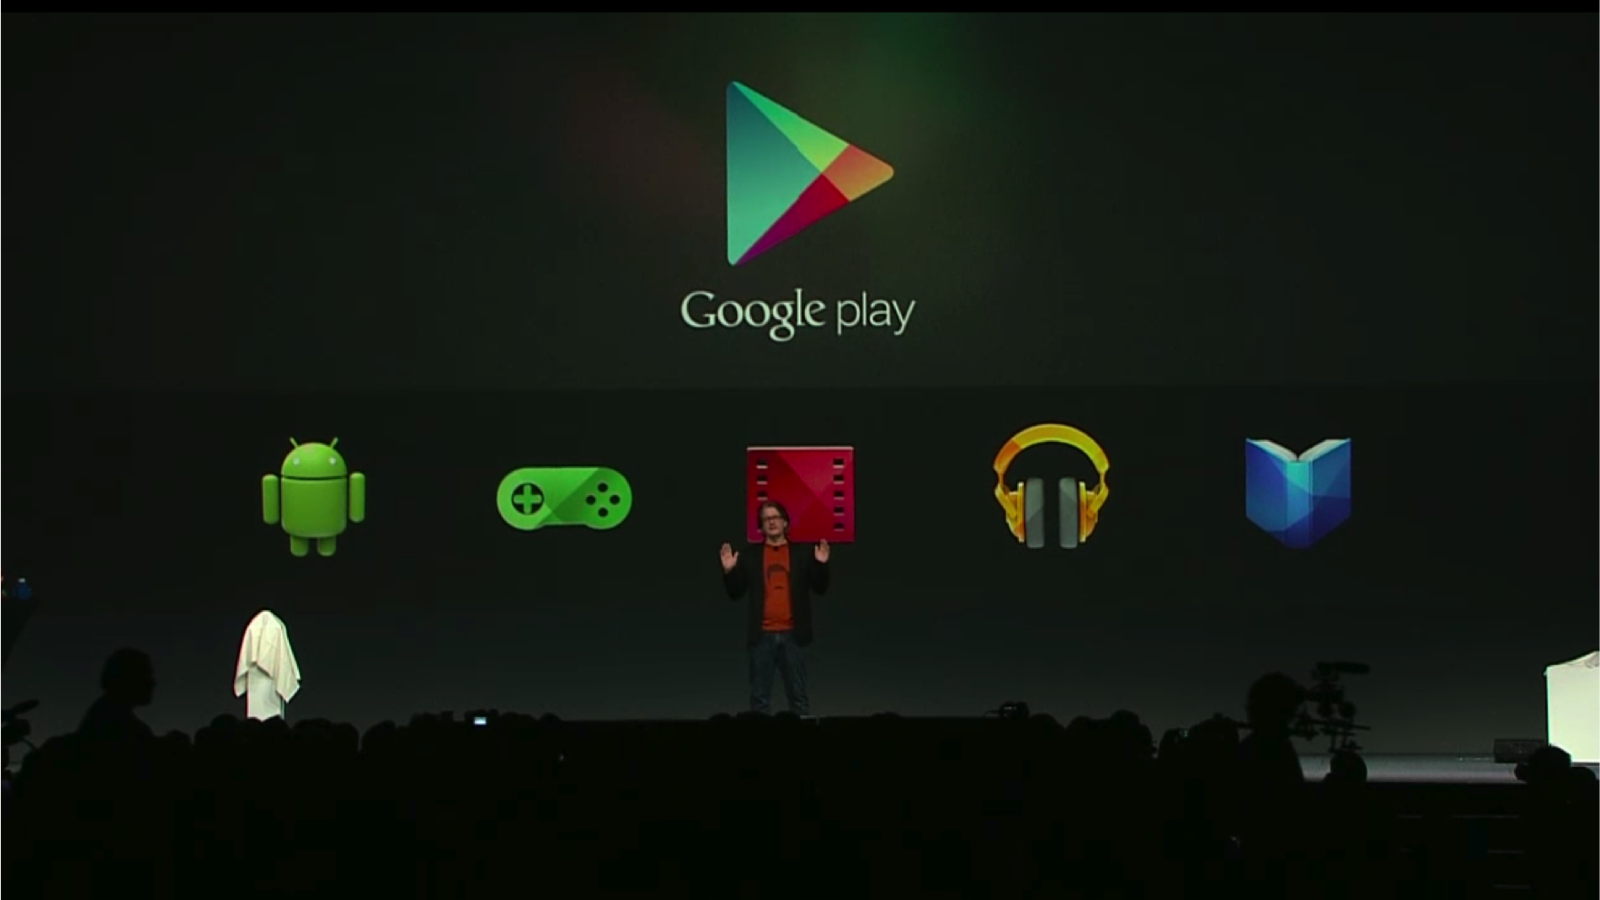 Success of Google Play Continues to Grow